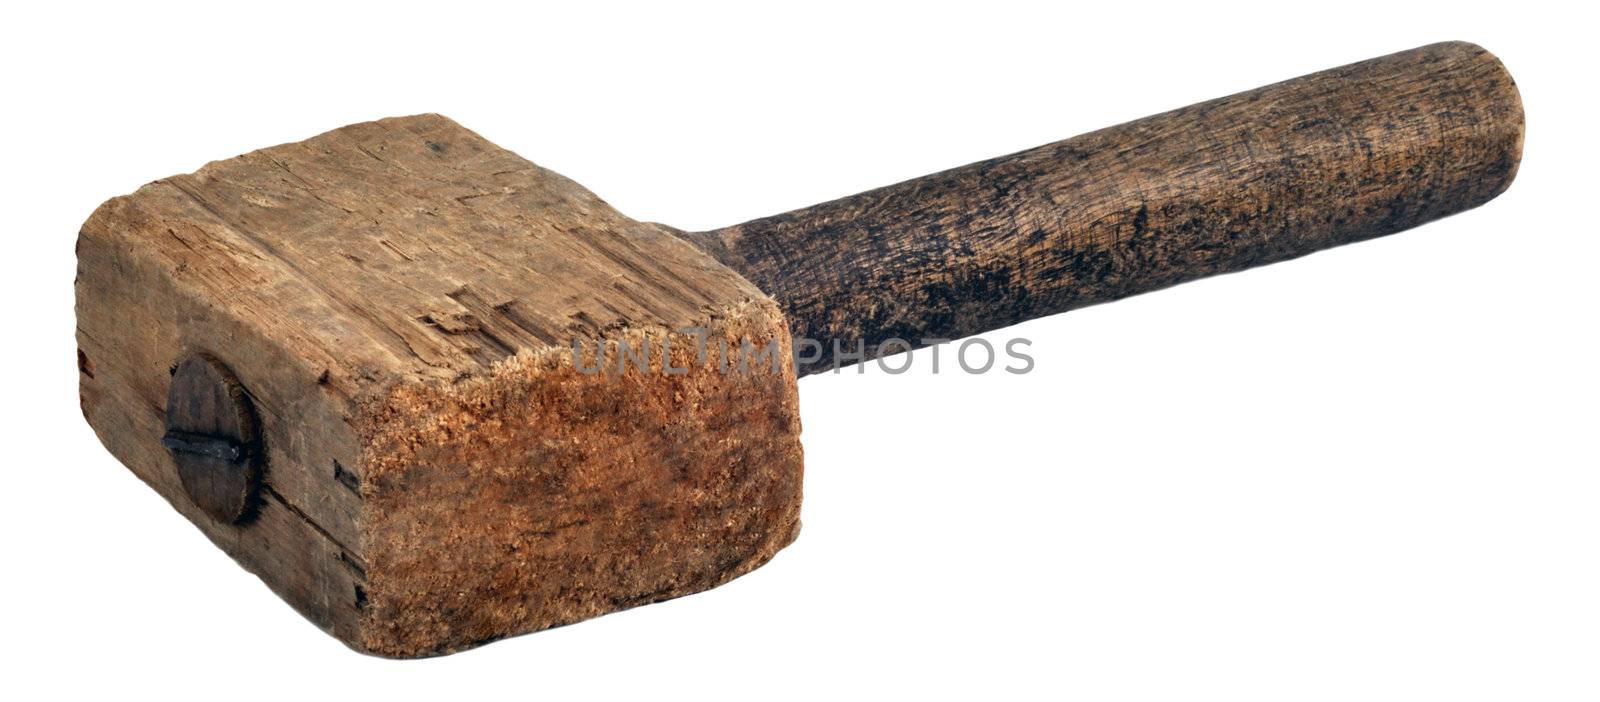 Hammer wooden (mallet) by alexcoolok